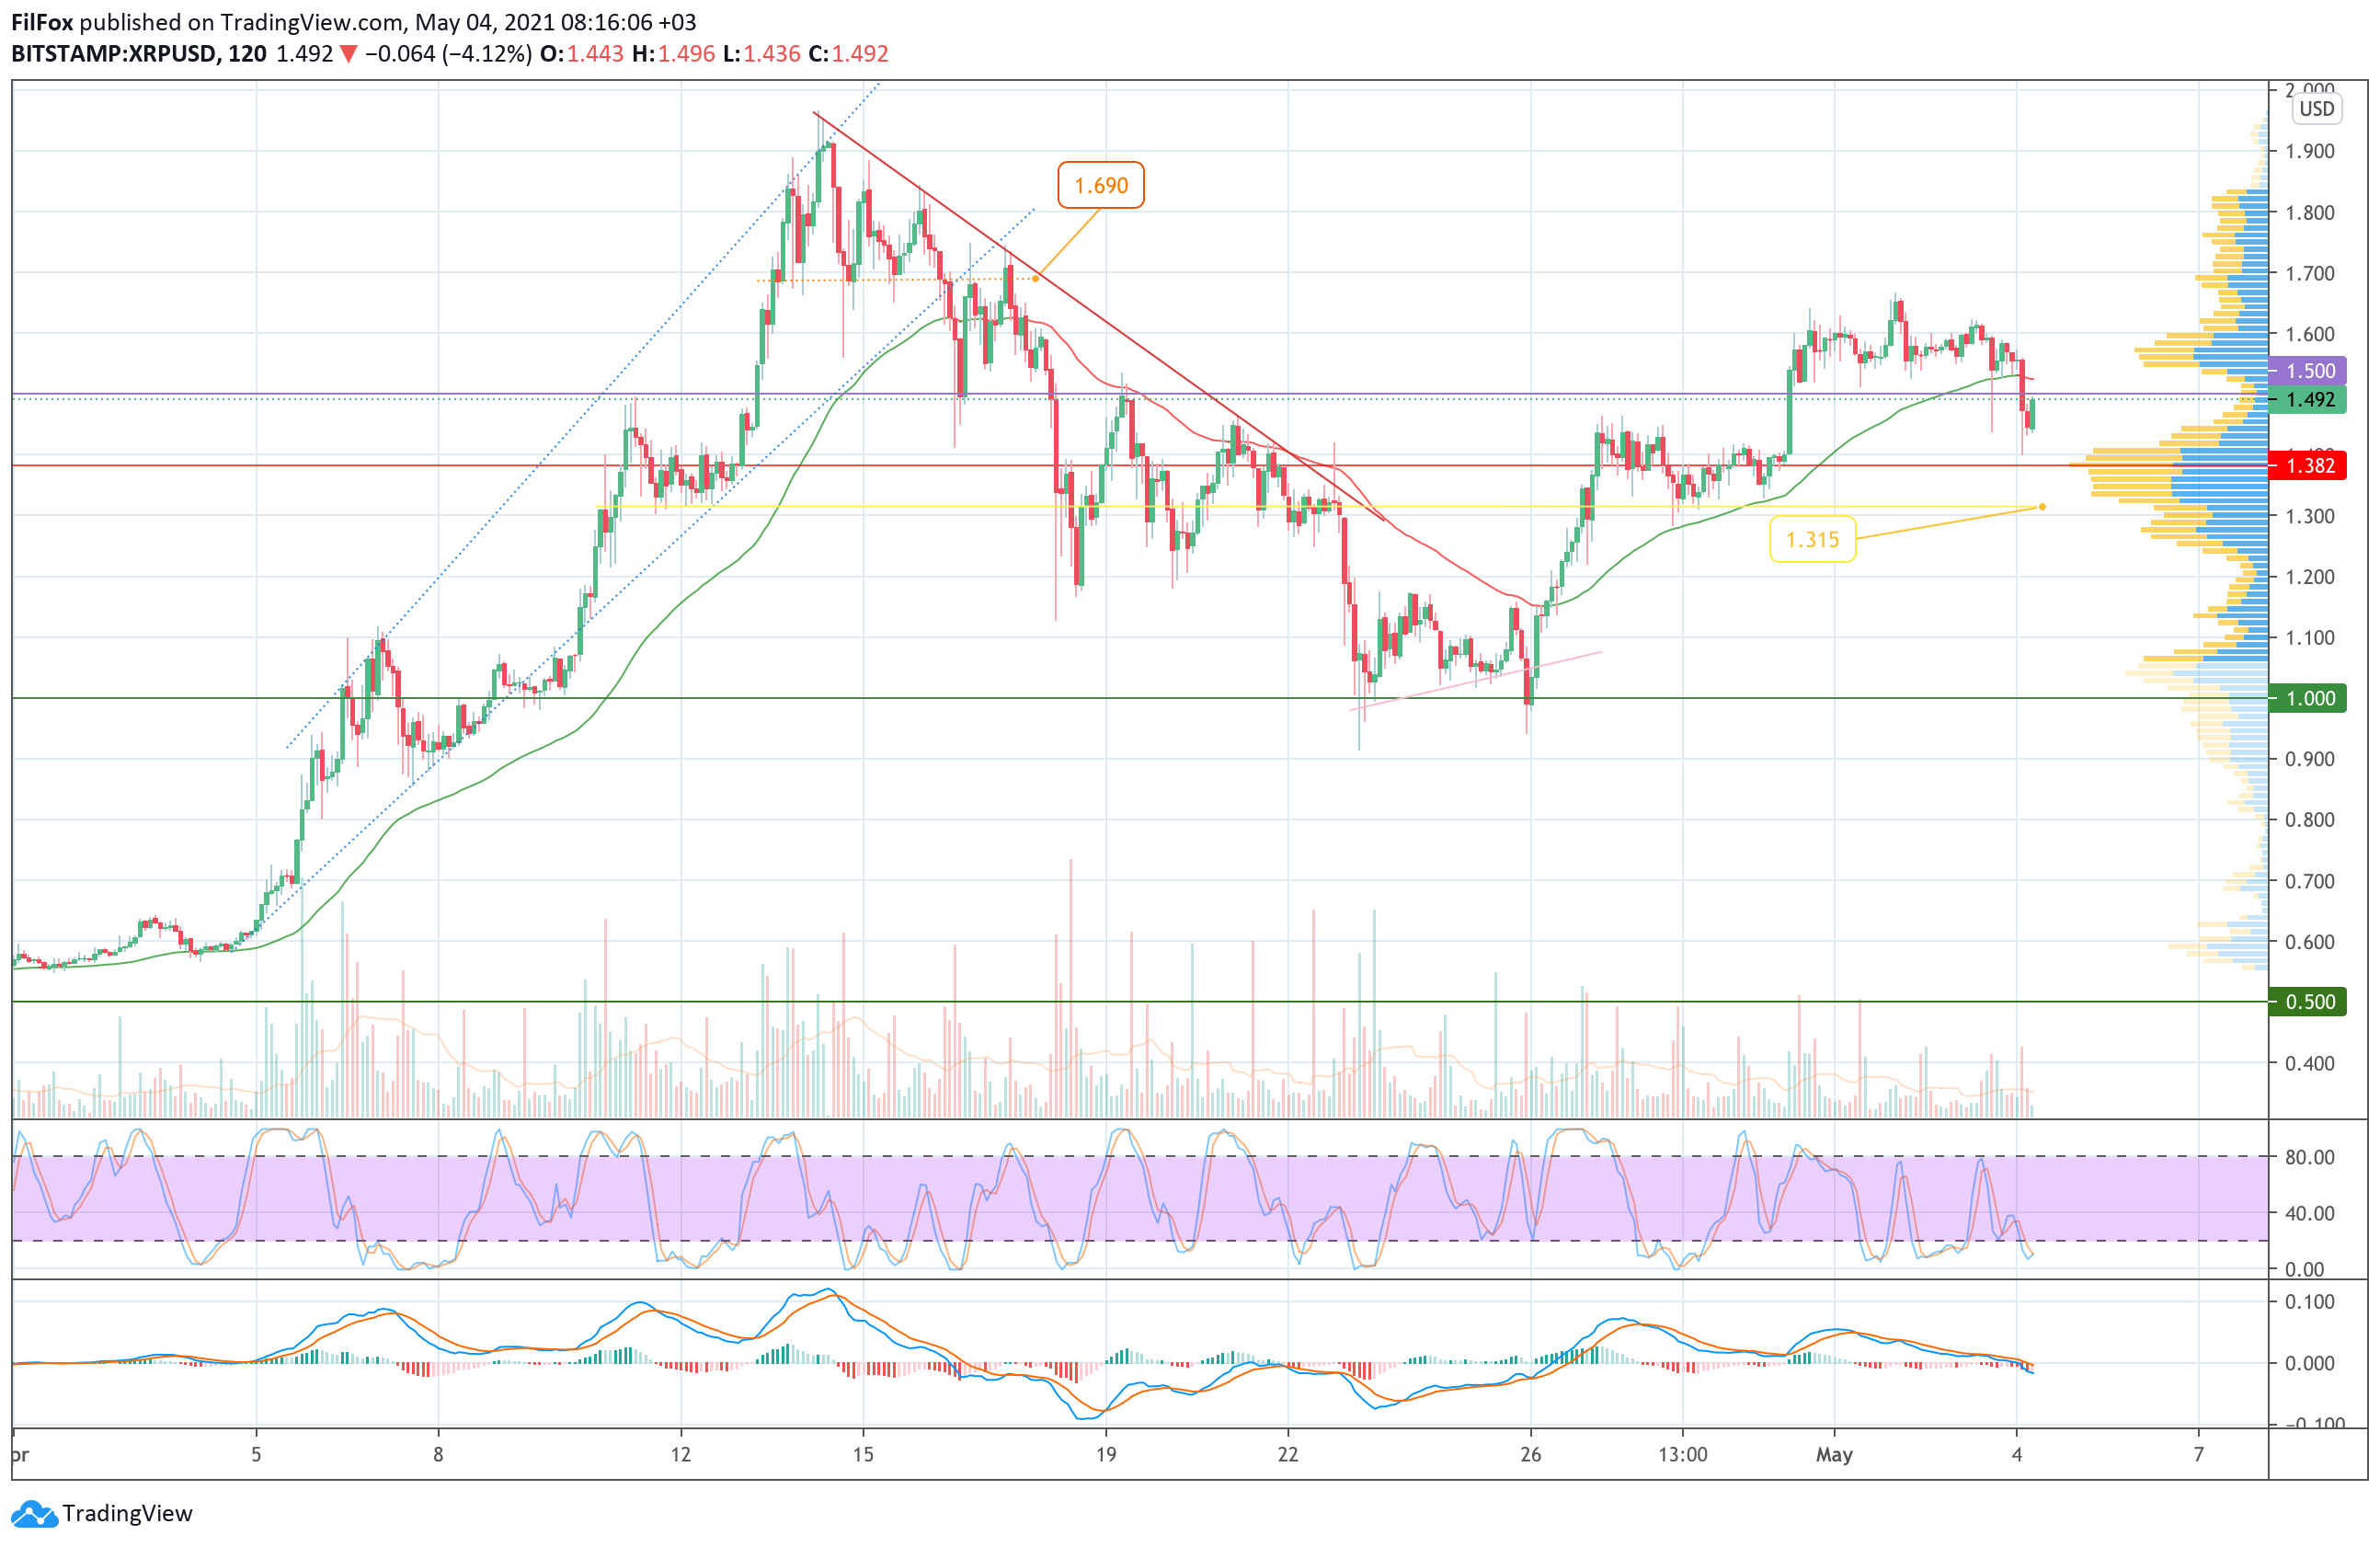 Analysis of the prices of Bitcoin, Ethereum, XRP for 04/05/2021